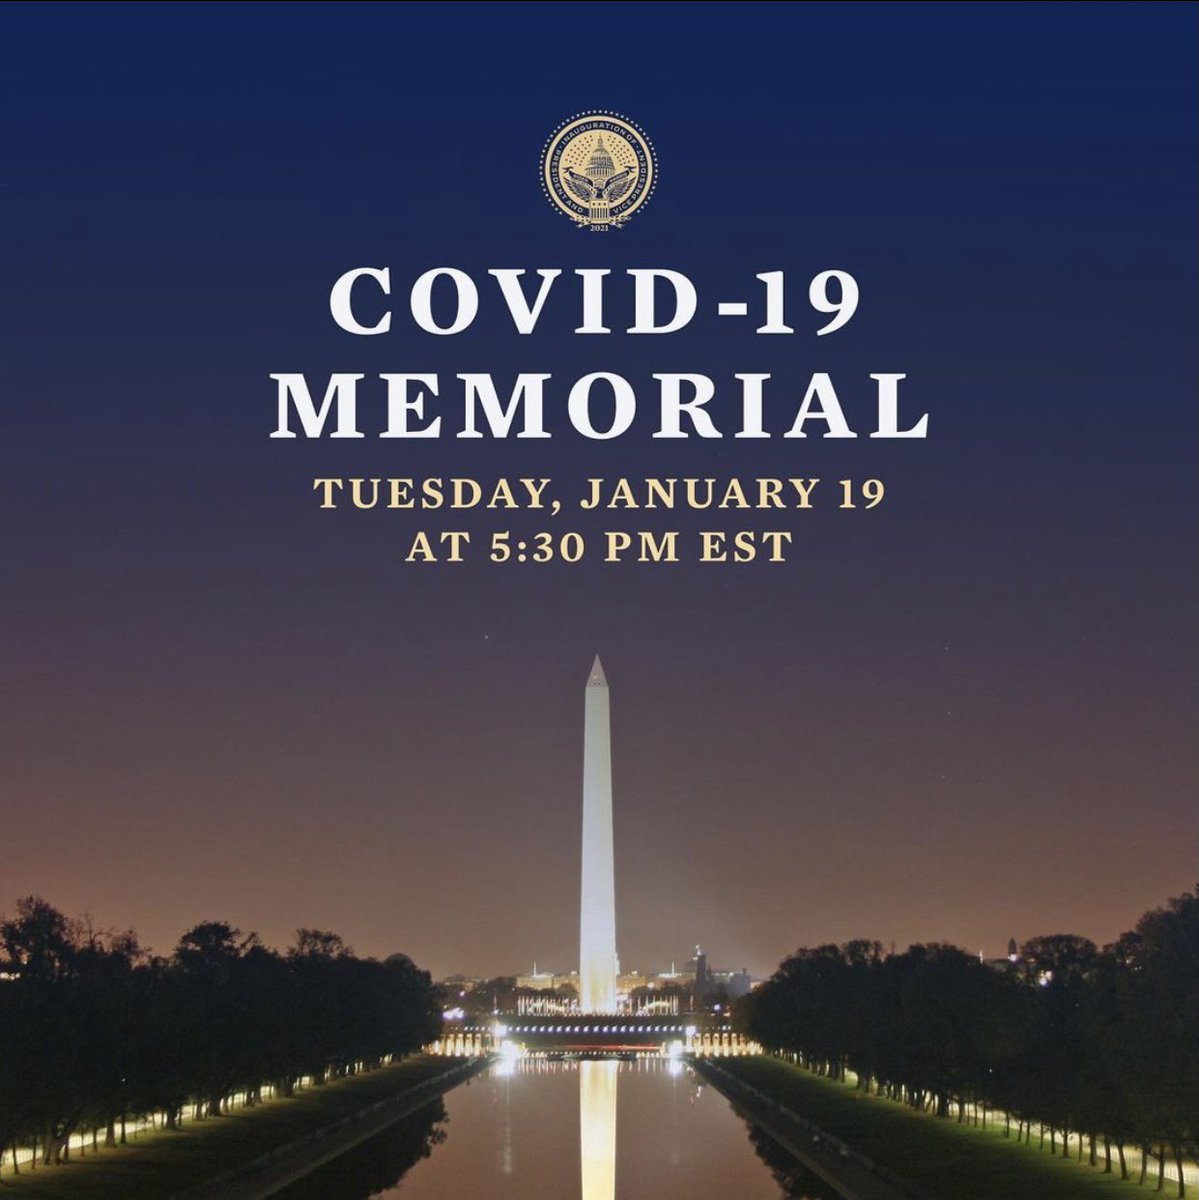 Today there will be a Covid-19 Memorial at Lincoln Memorial Reflecting Pool.Communities around the country will join in by lighting up buildings, ringing church bells, and placing candles in windows of homes at 5:30 p.m.